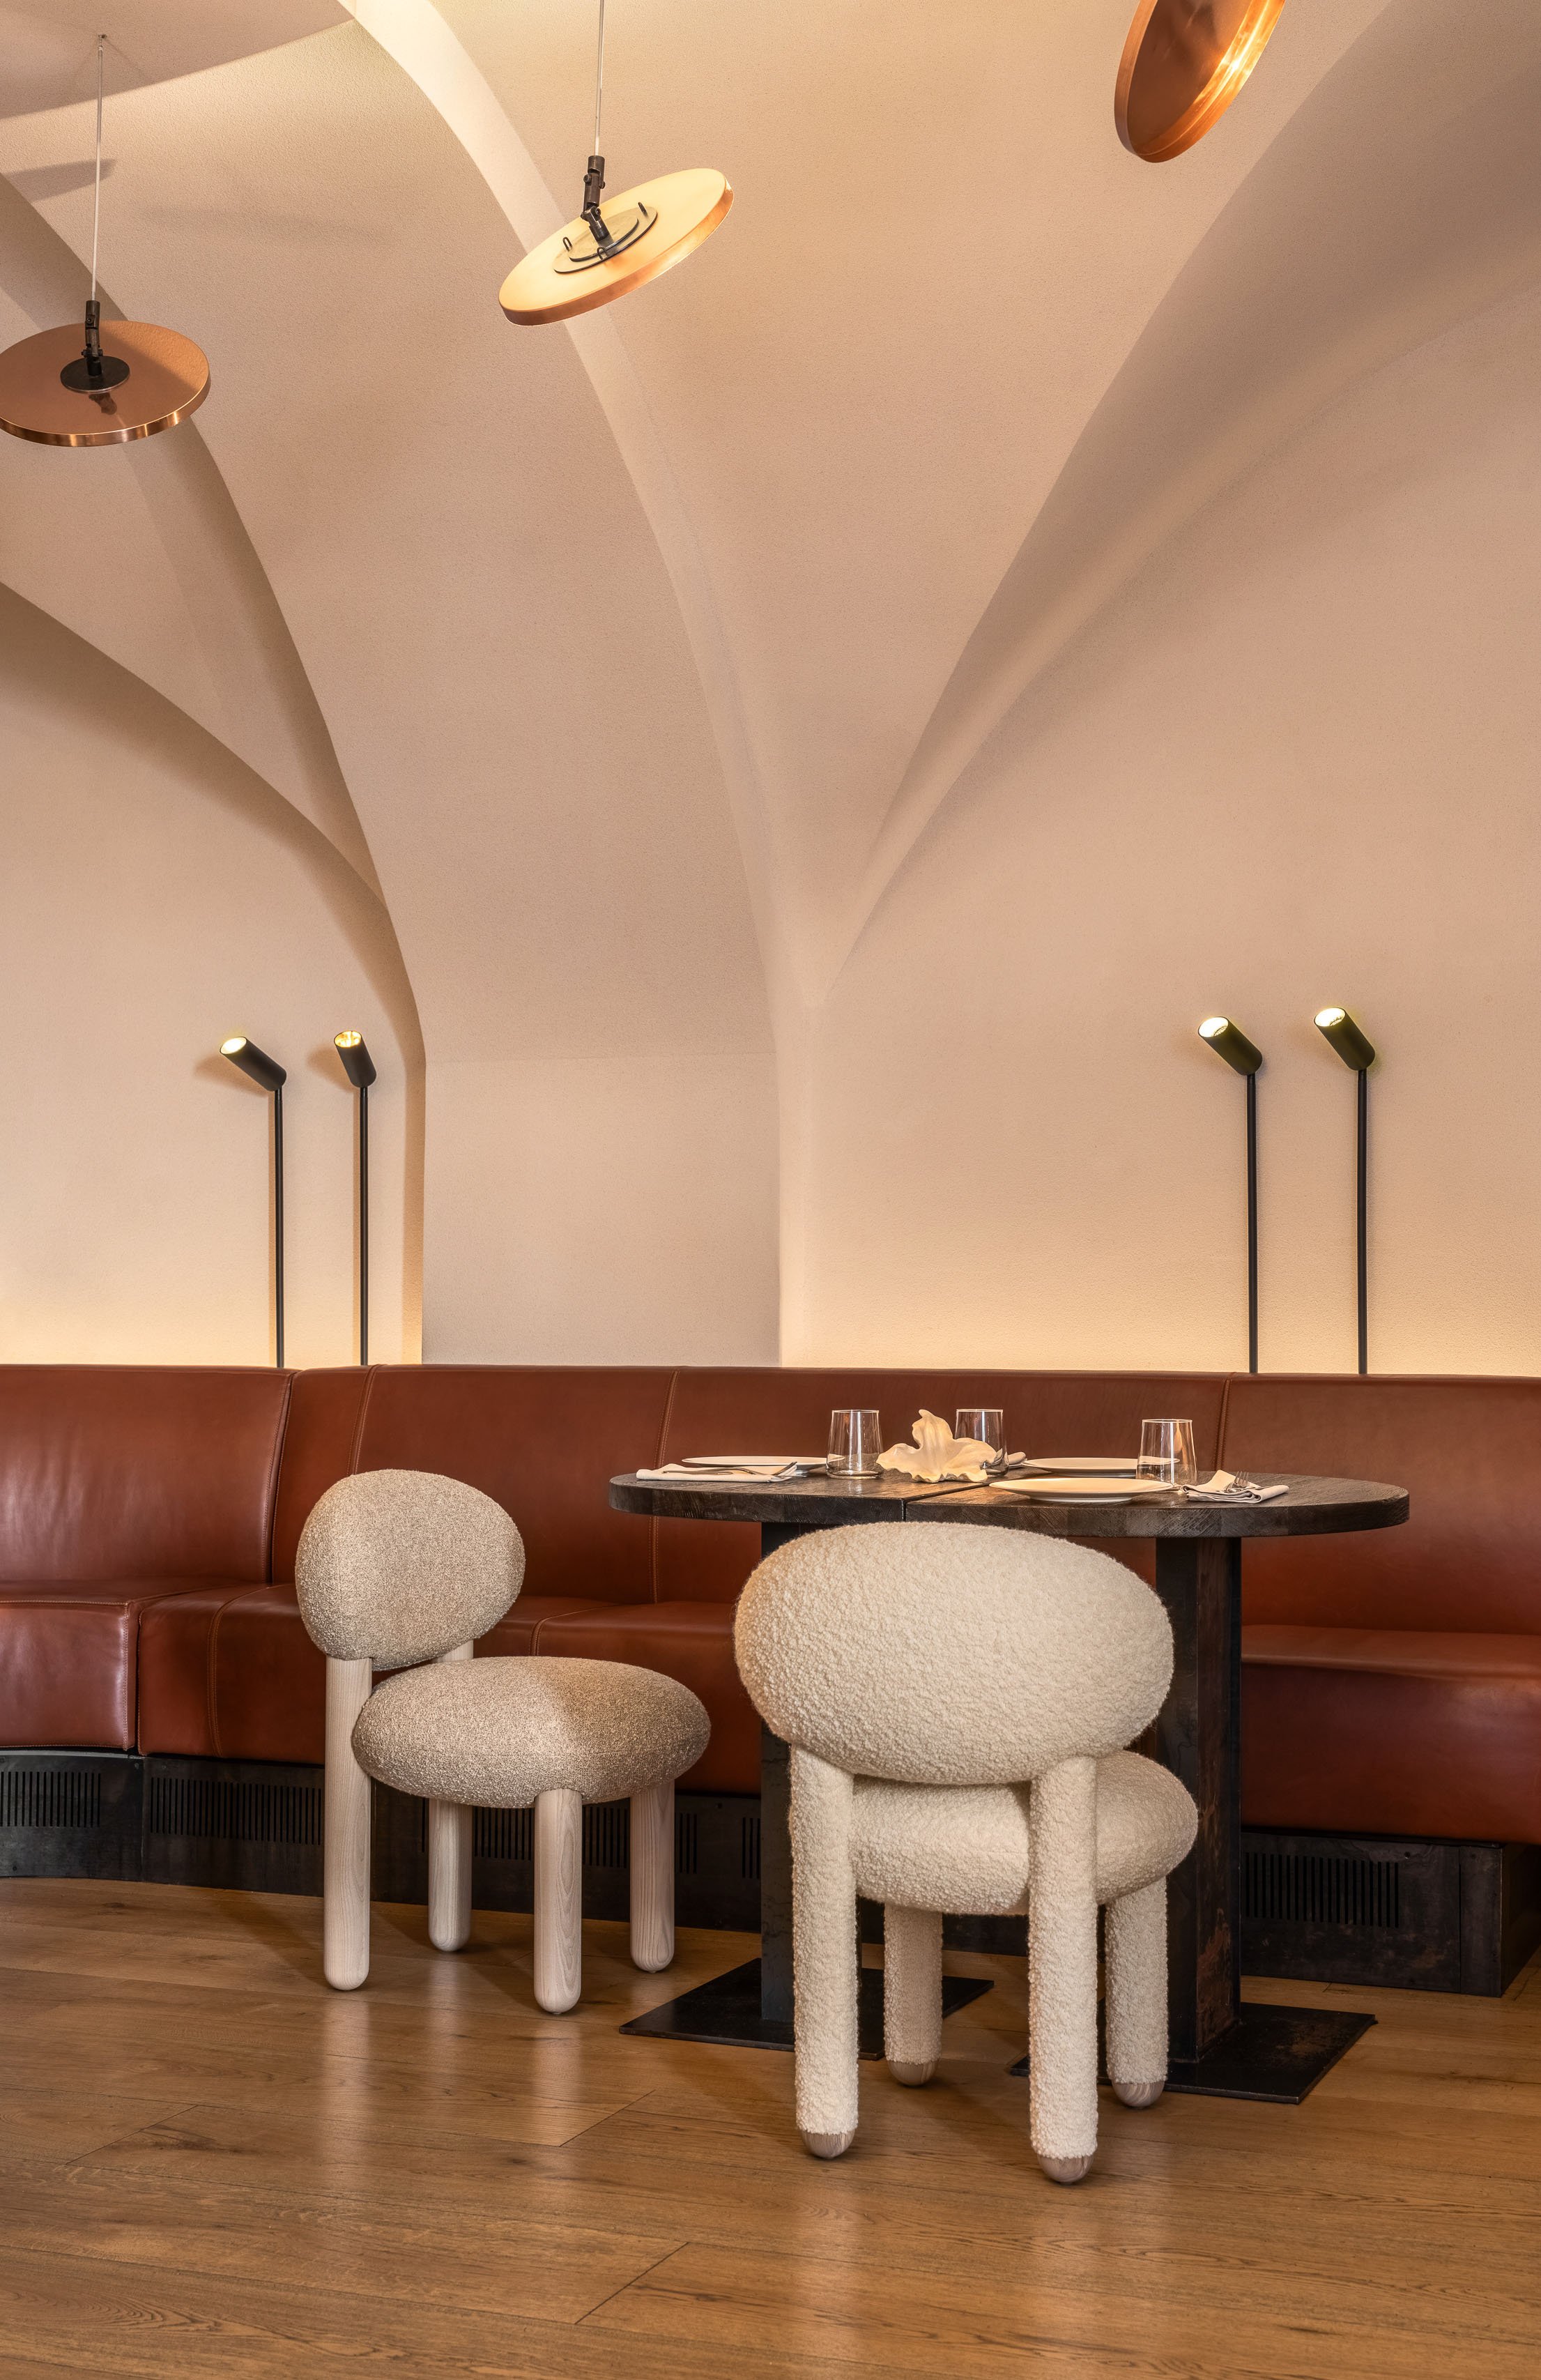 _Flock chairs by NOOM in Samna restaurant by YOD Group (7).jpg